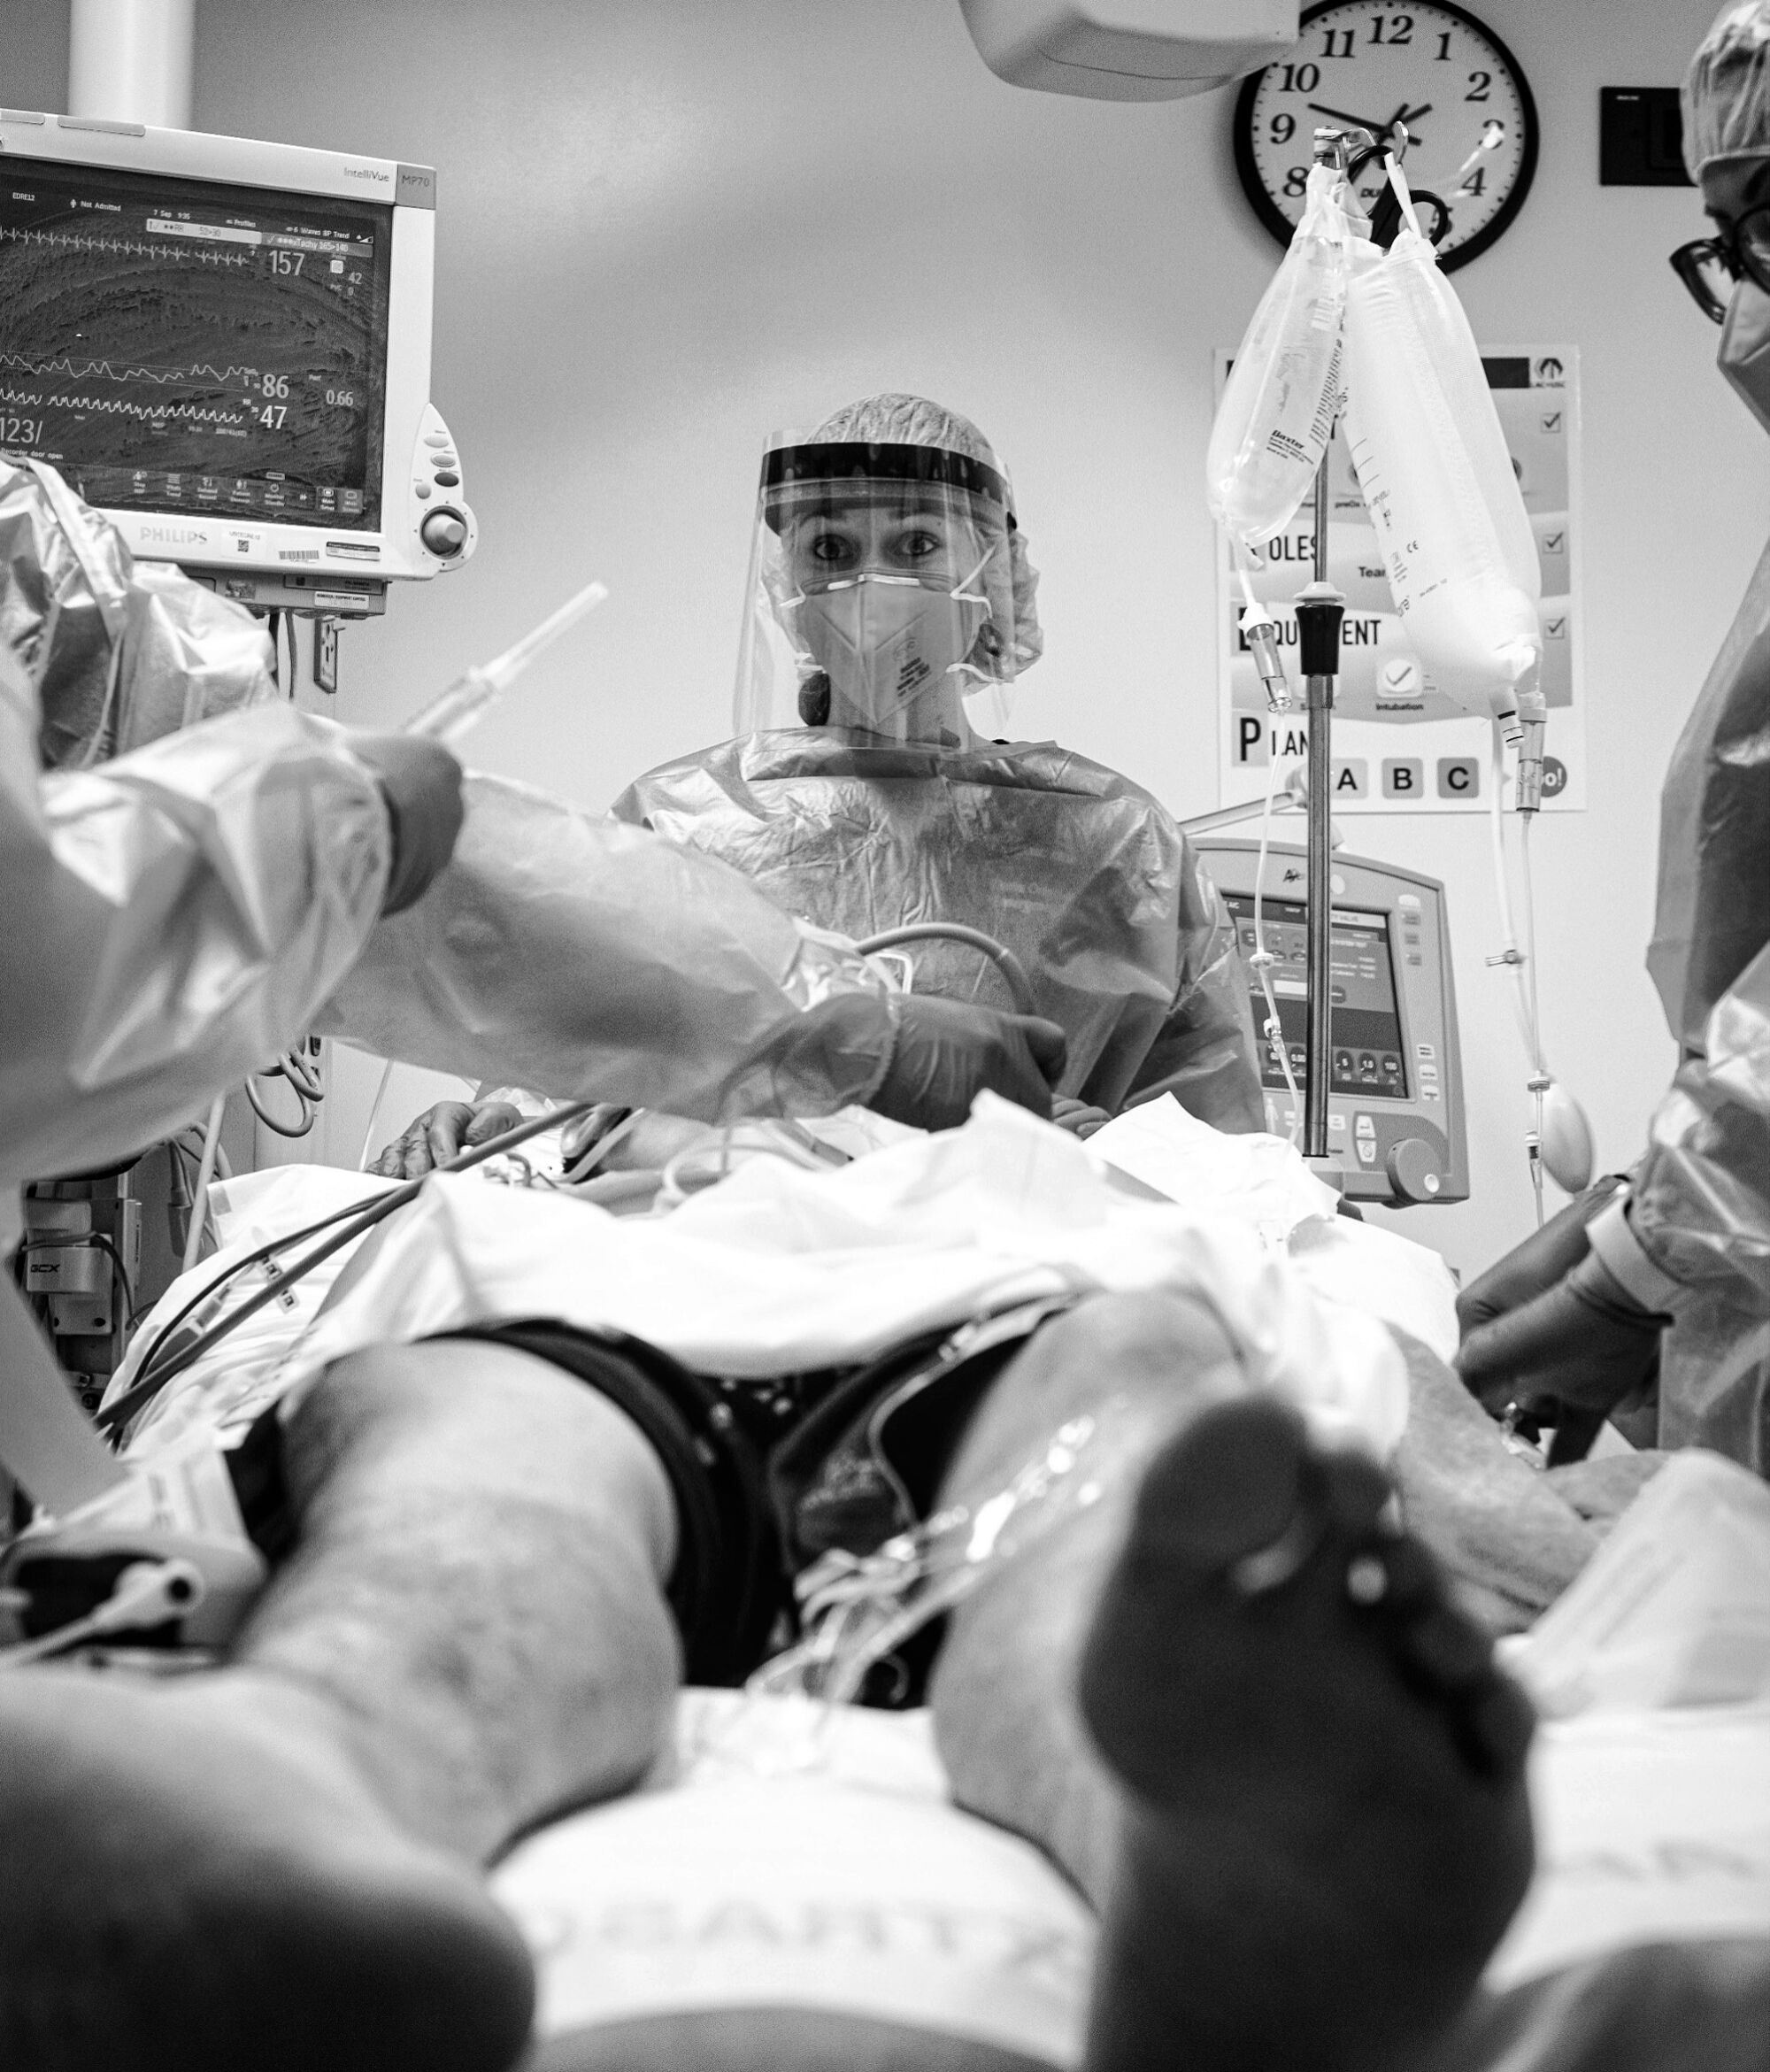 Dr. Daria Osipchuk looks out at her team before intubating a young man.